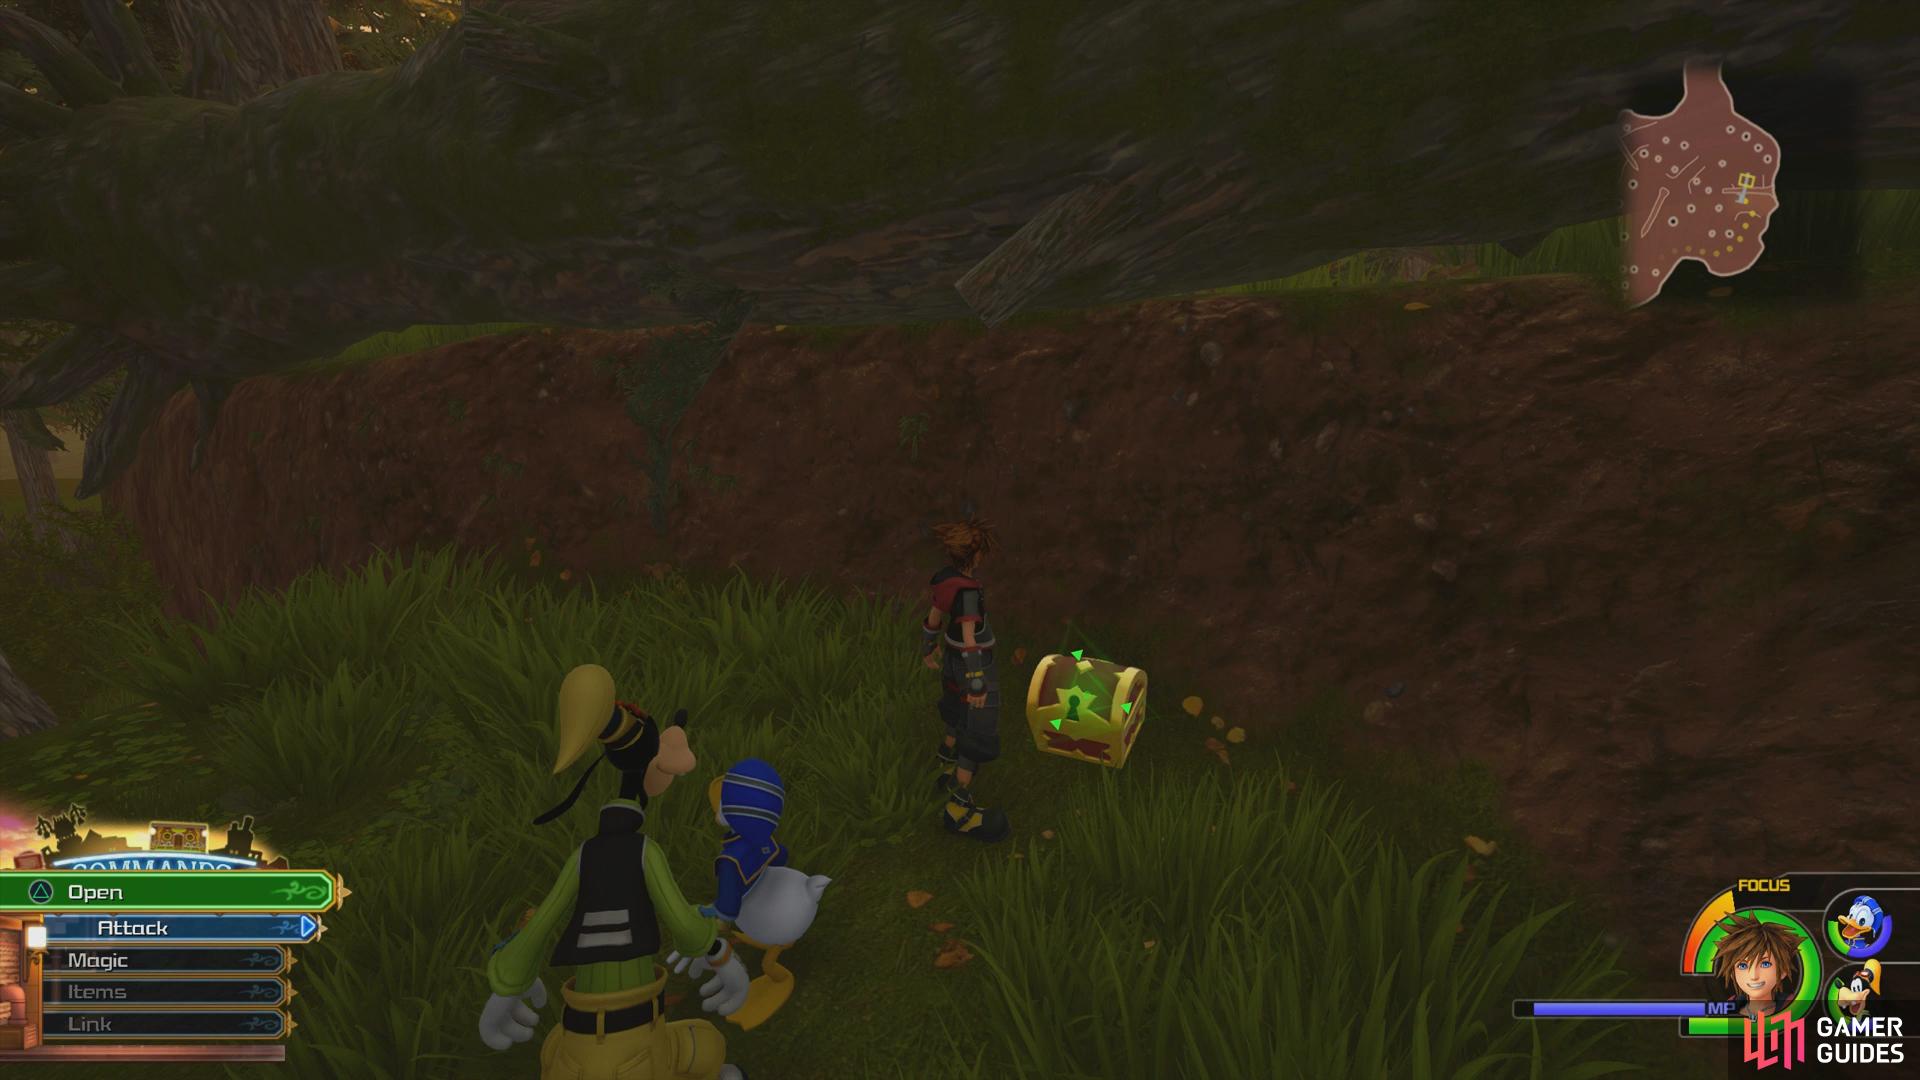 Head to the far east of the map to find this chest